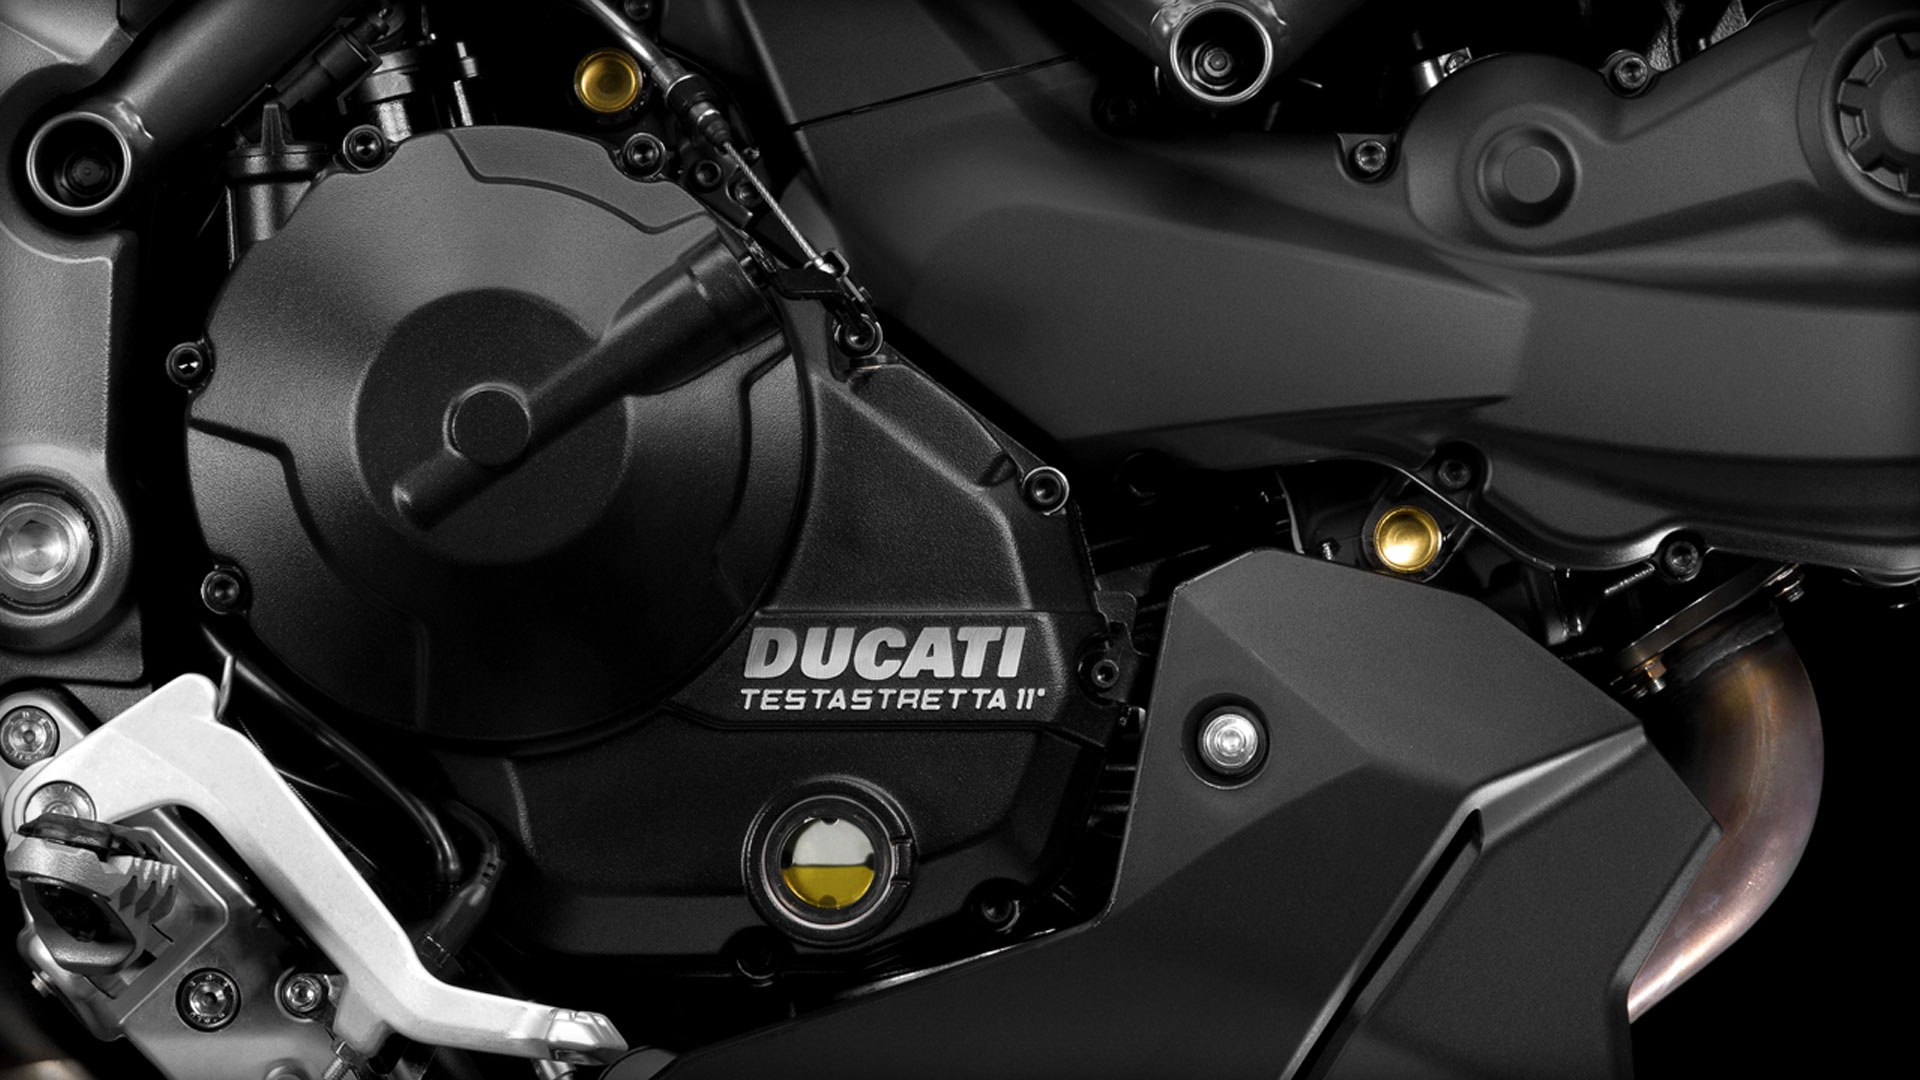 Get the Ducati Multistrada 950 White at P&H Motorcycles